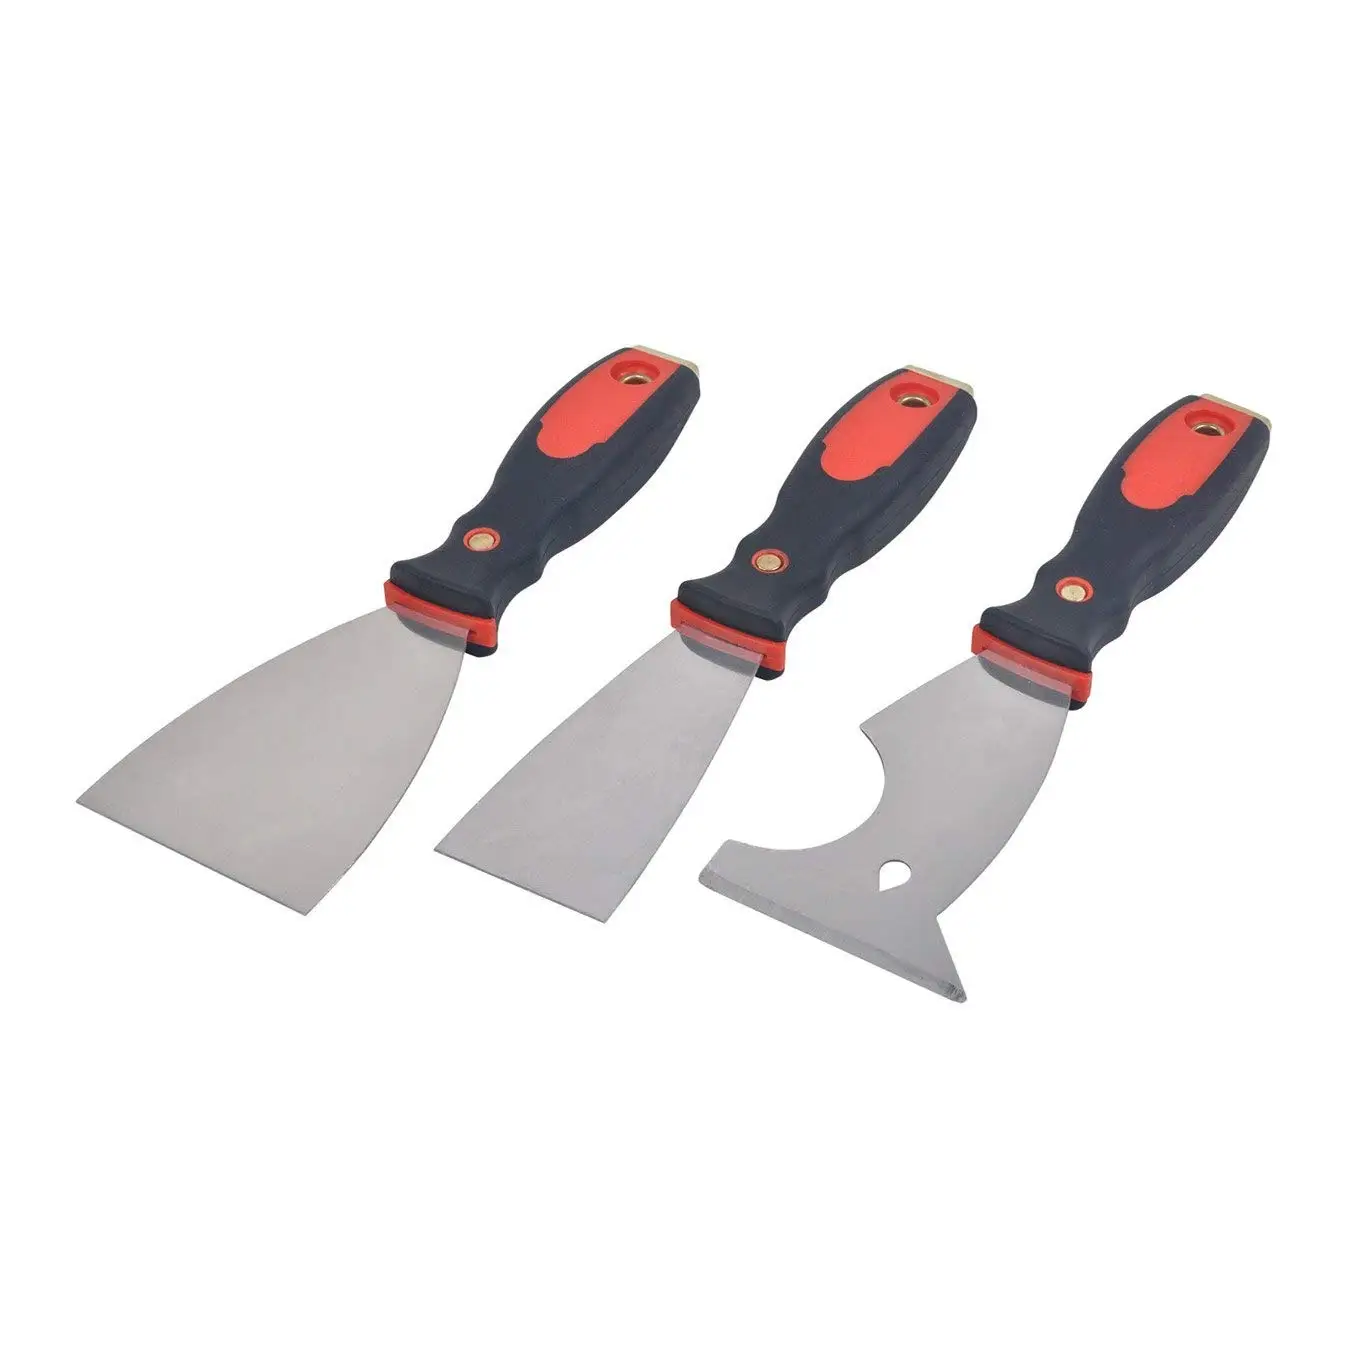 5 in 1 putty knife